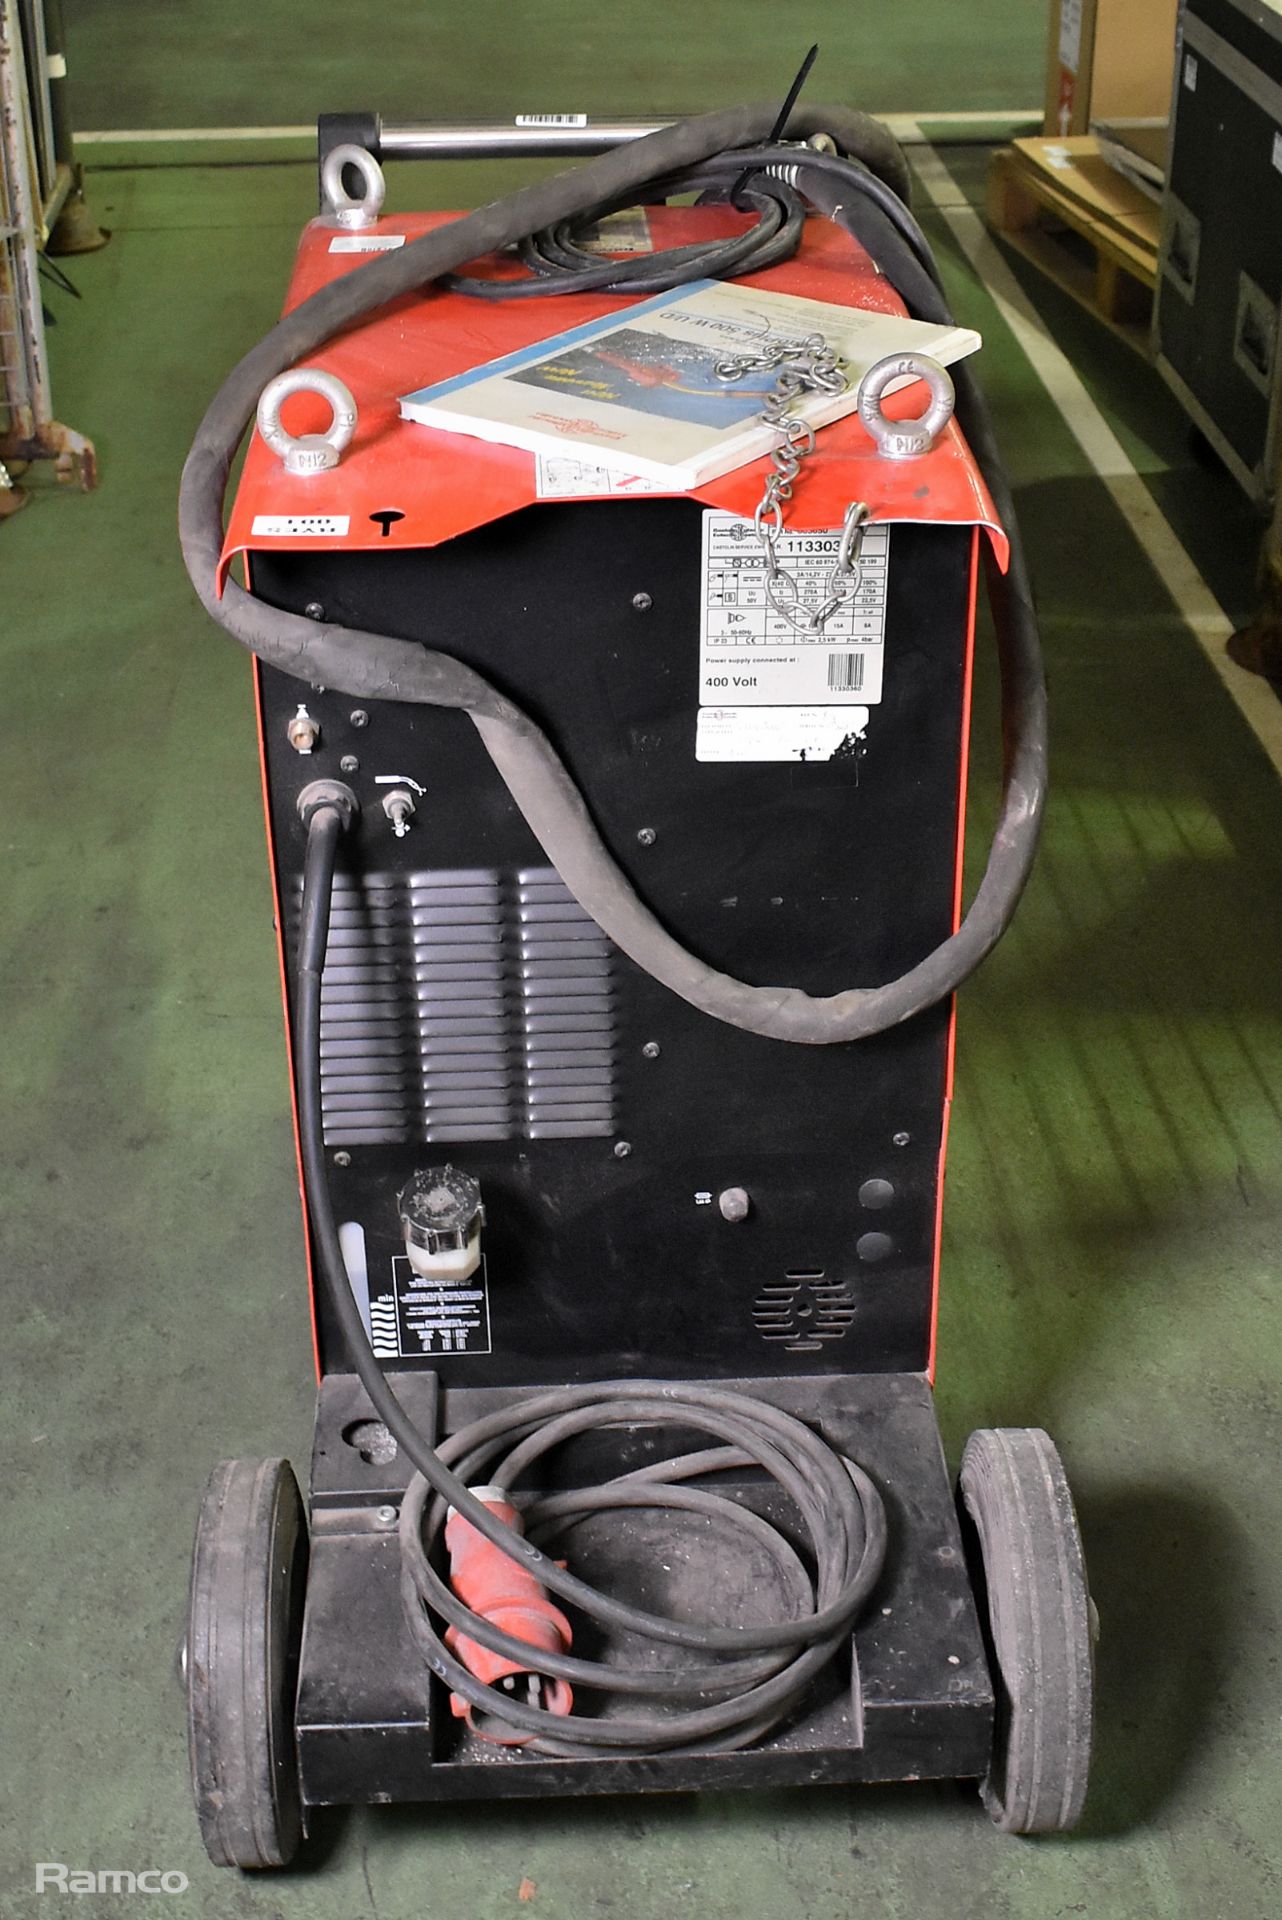 CastoPlus 500W TotalArc2-3000 mig welder with instruction manual - L 900 x W 500 x H 900mm - Image 5 of 10